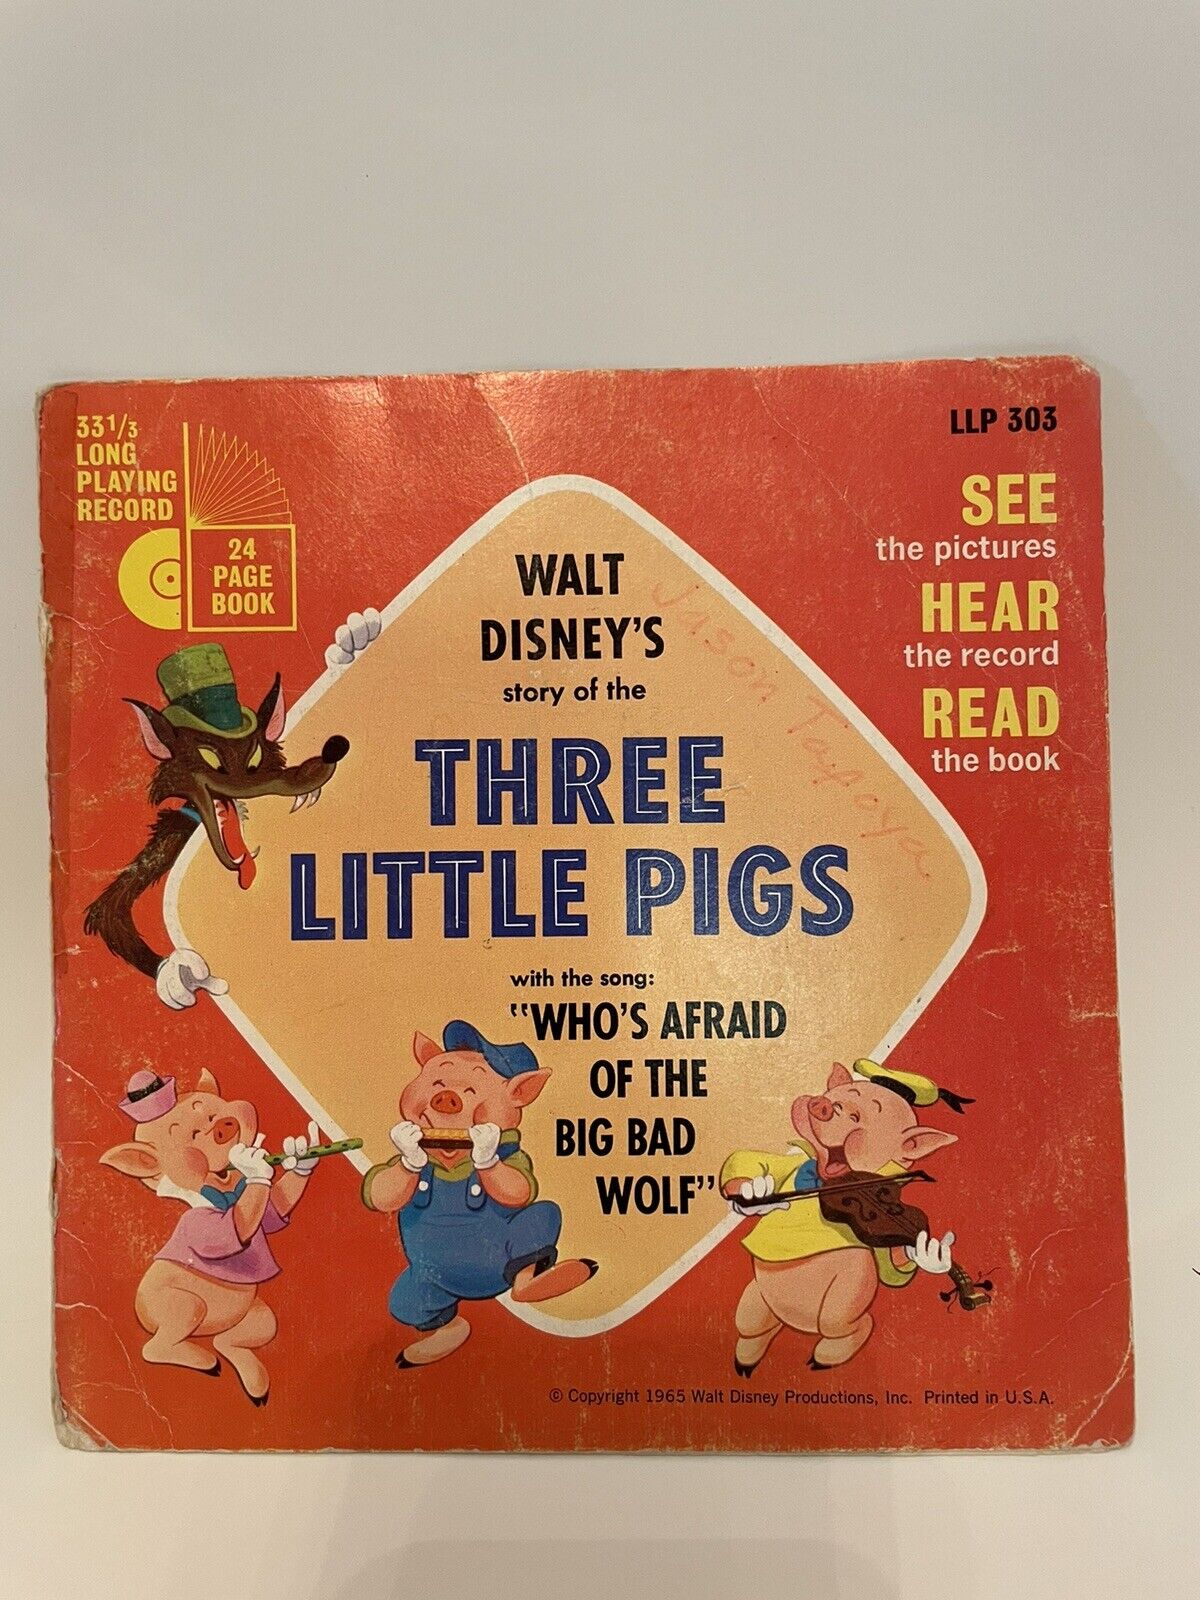 Walt Disney’s Three Little Pigs 331/3 Long Playing Record Llp 303 Cover Only